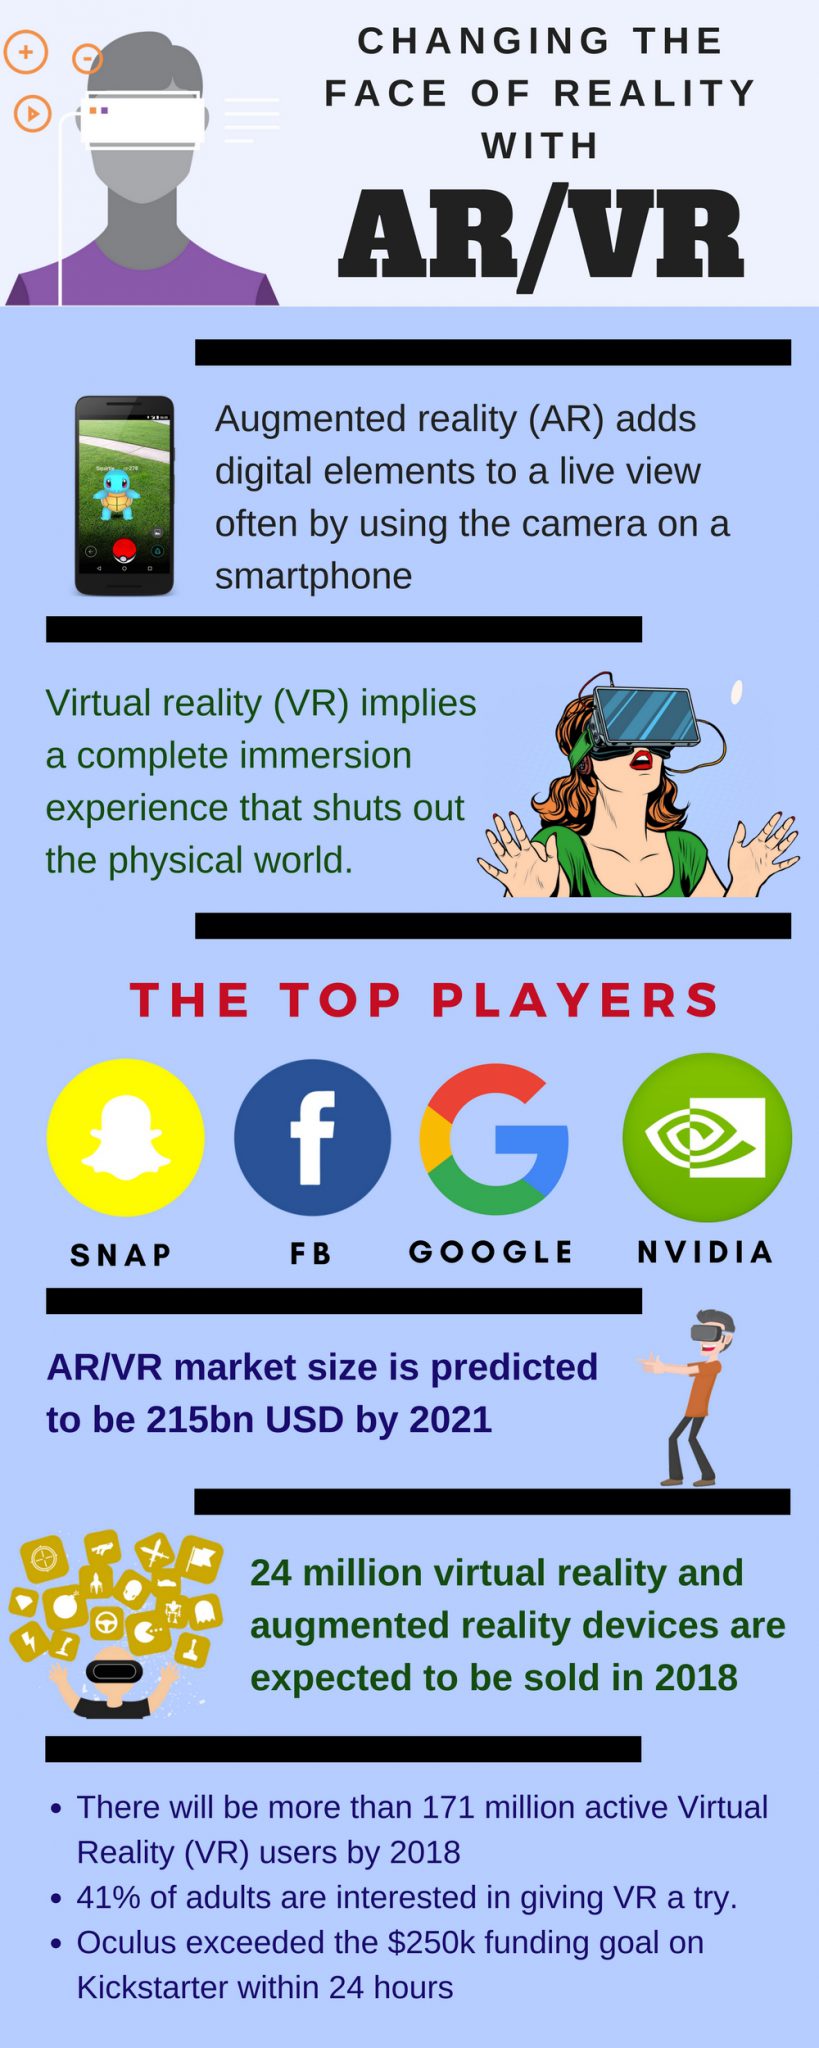 AR/VR: Changing The Face Of Reality